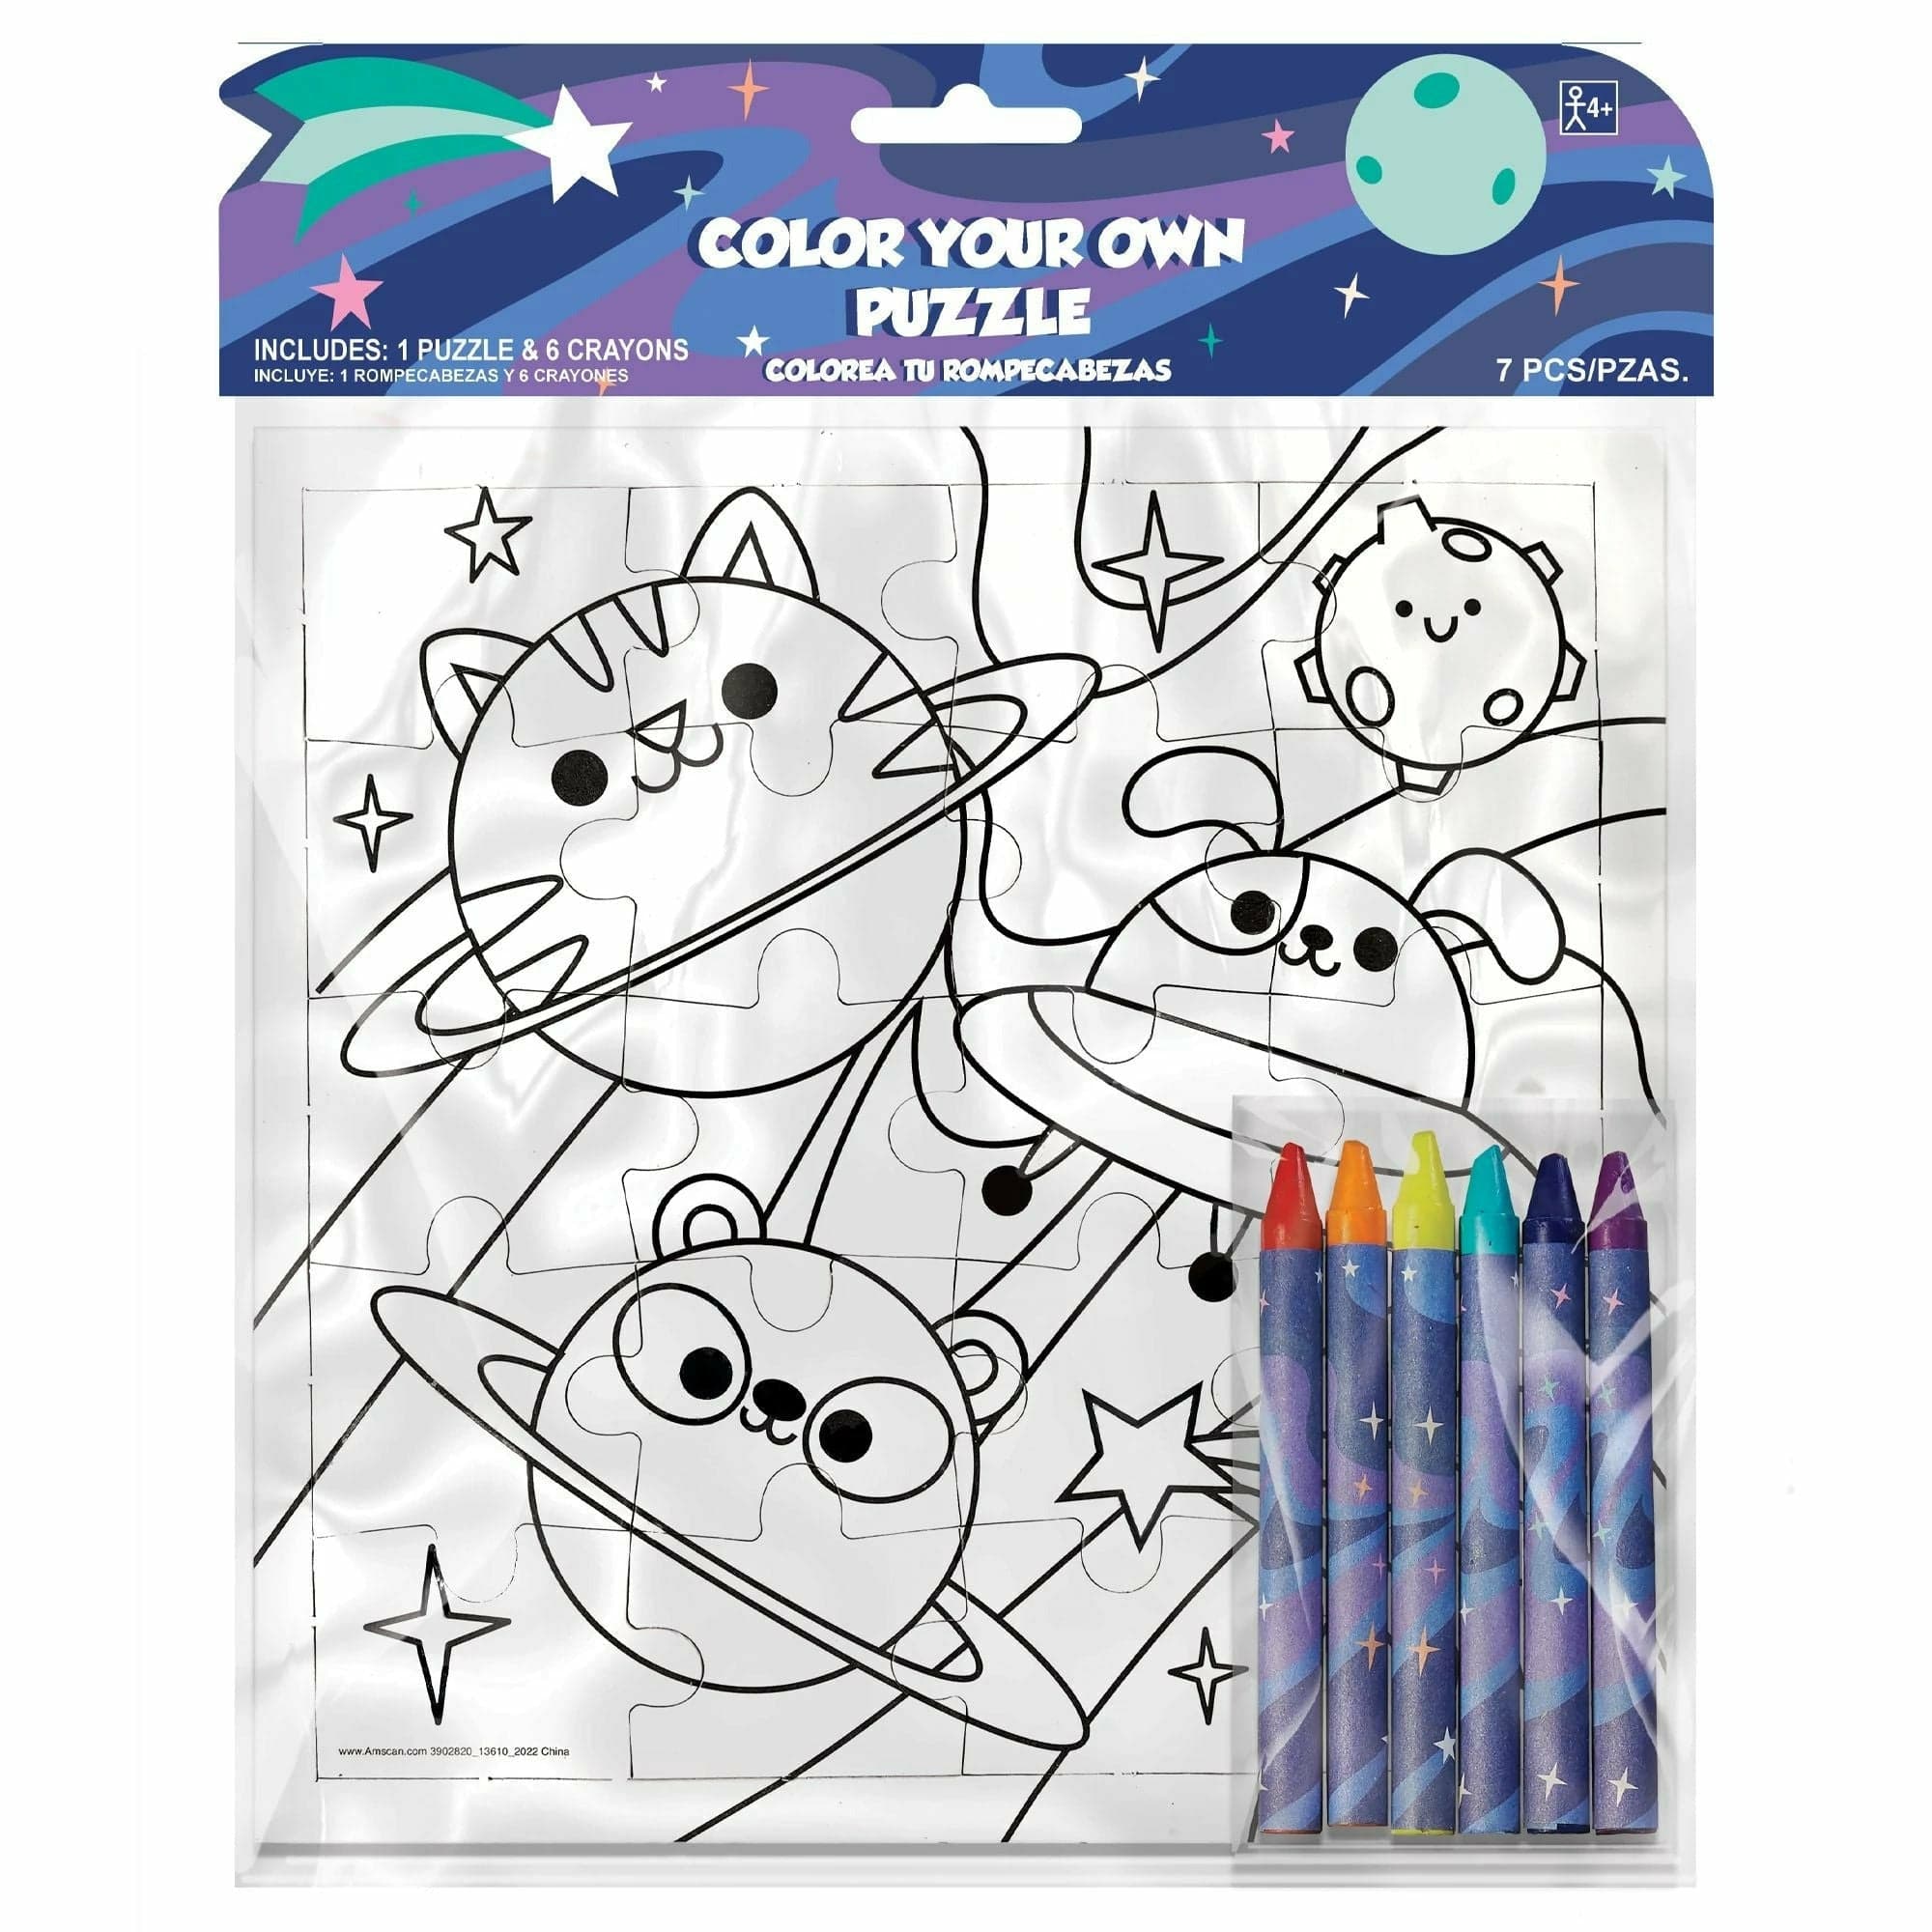 Space theme color your own puzzle w crayons